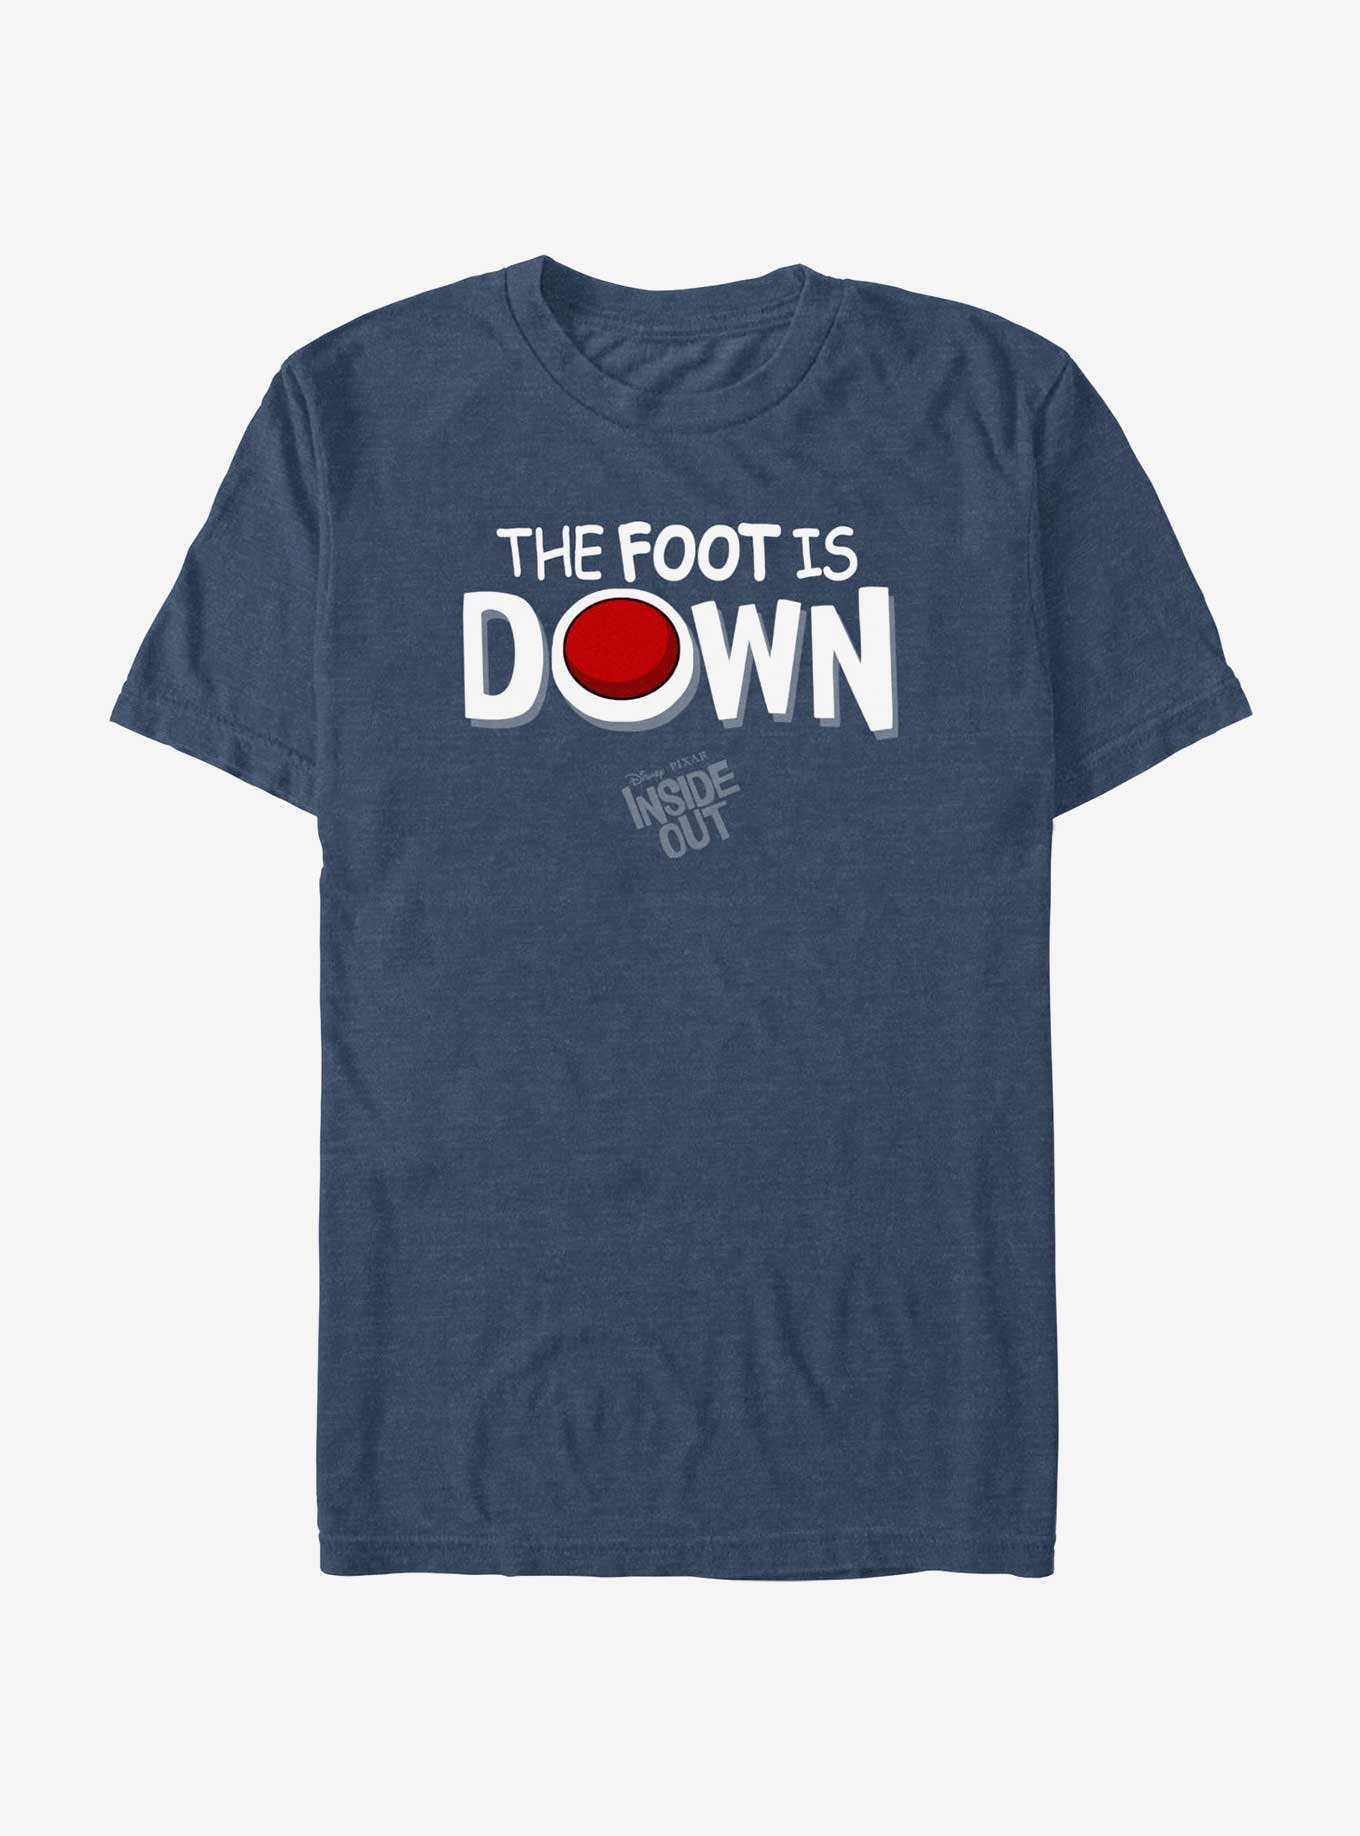 Disney Pixar Inside Out 2 The Foot Is Down T-Shirt, , hi-res